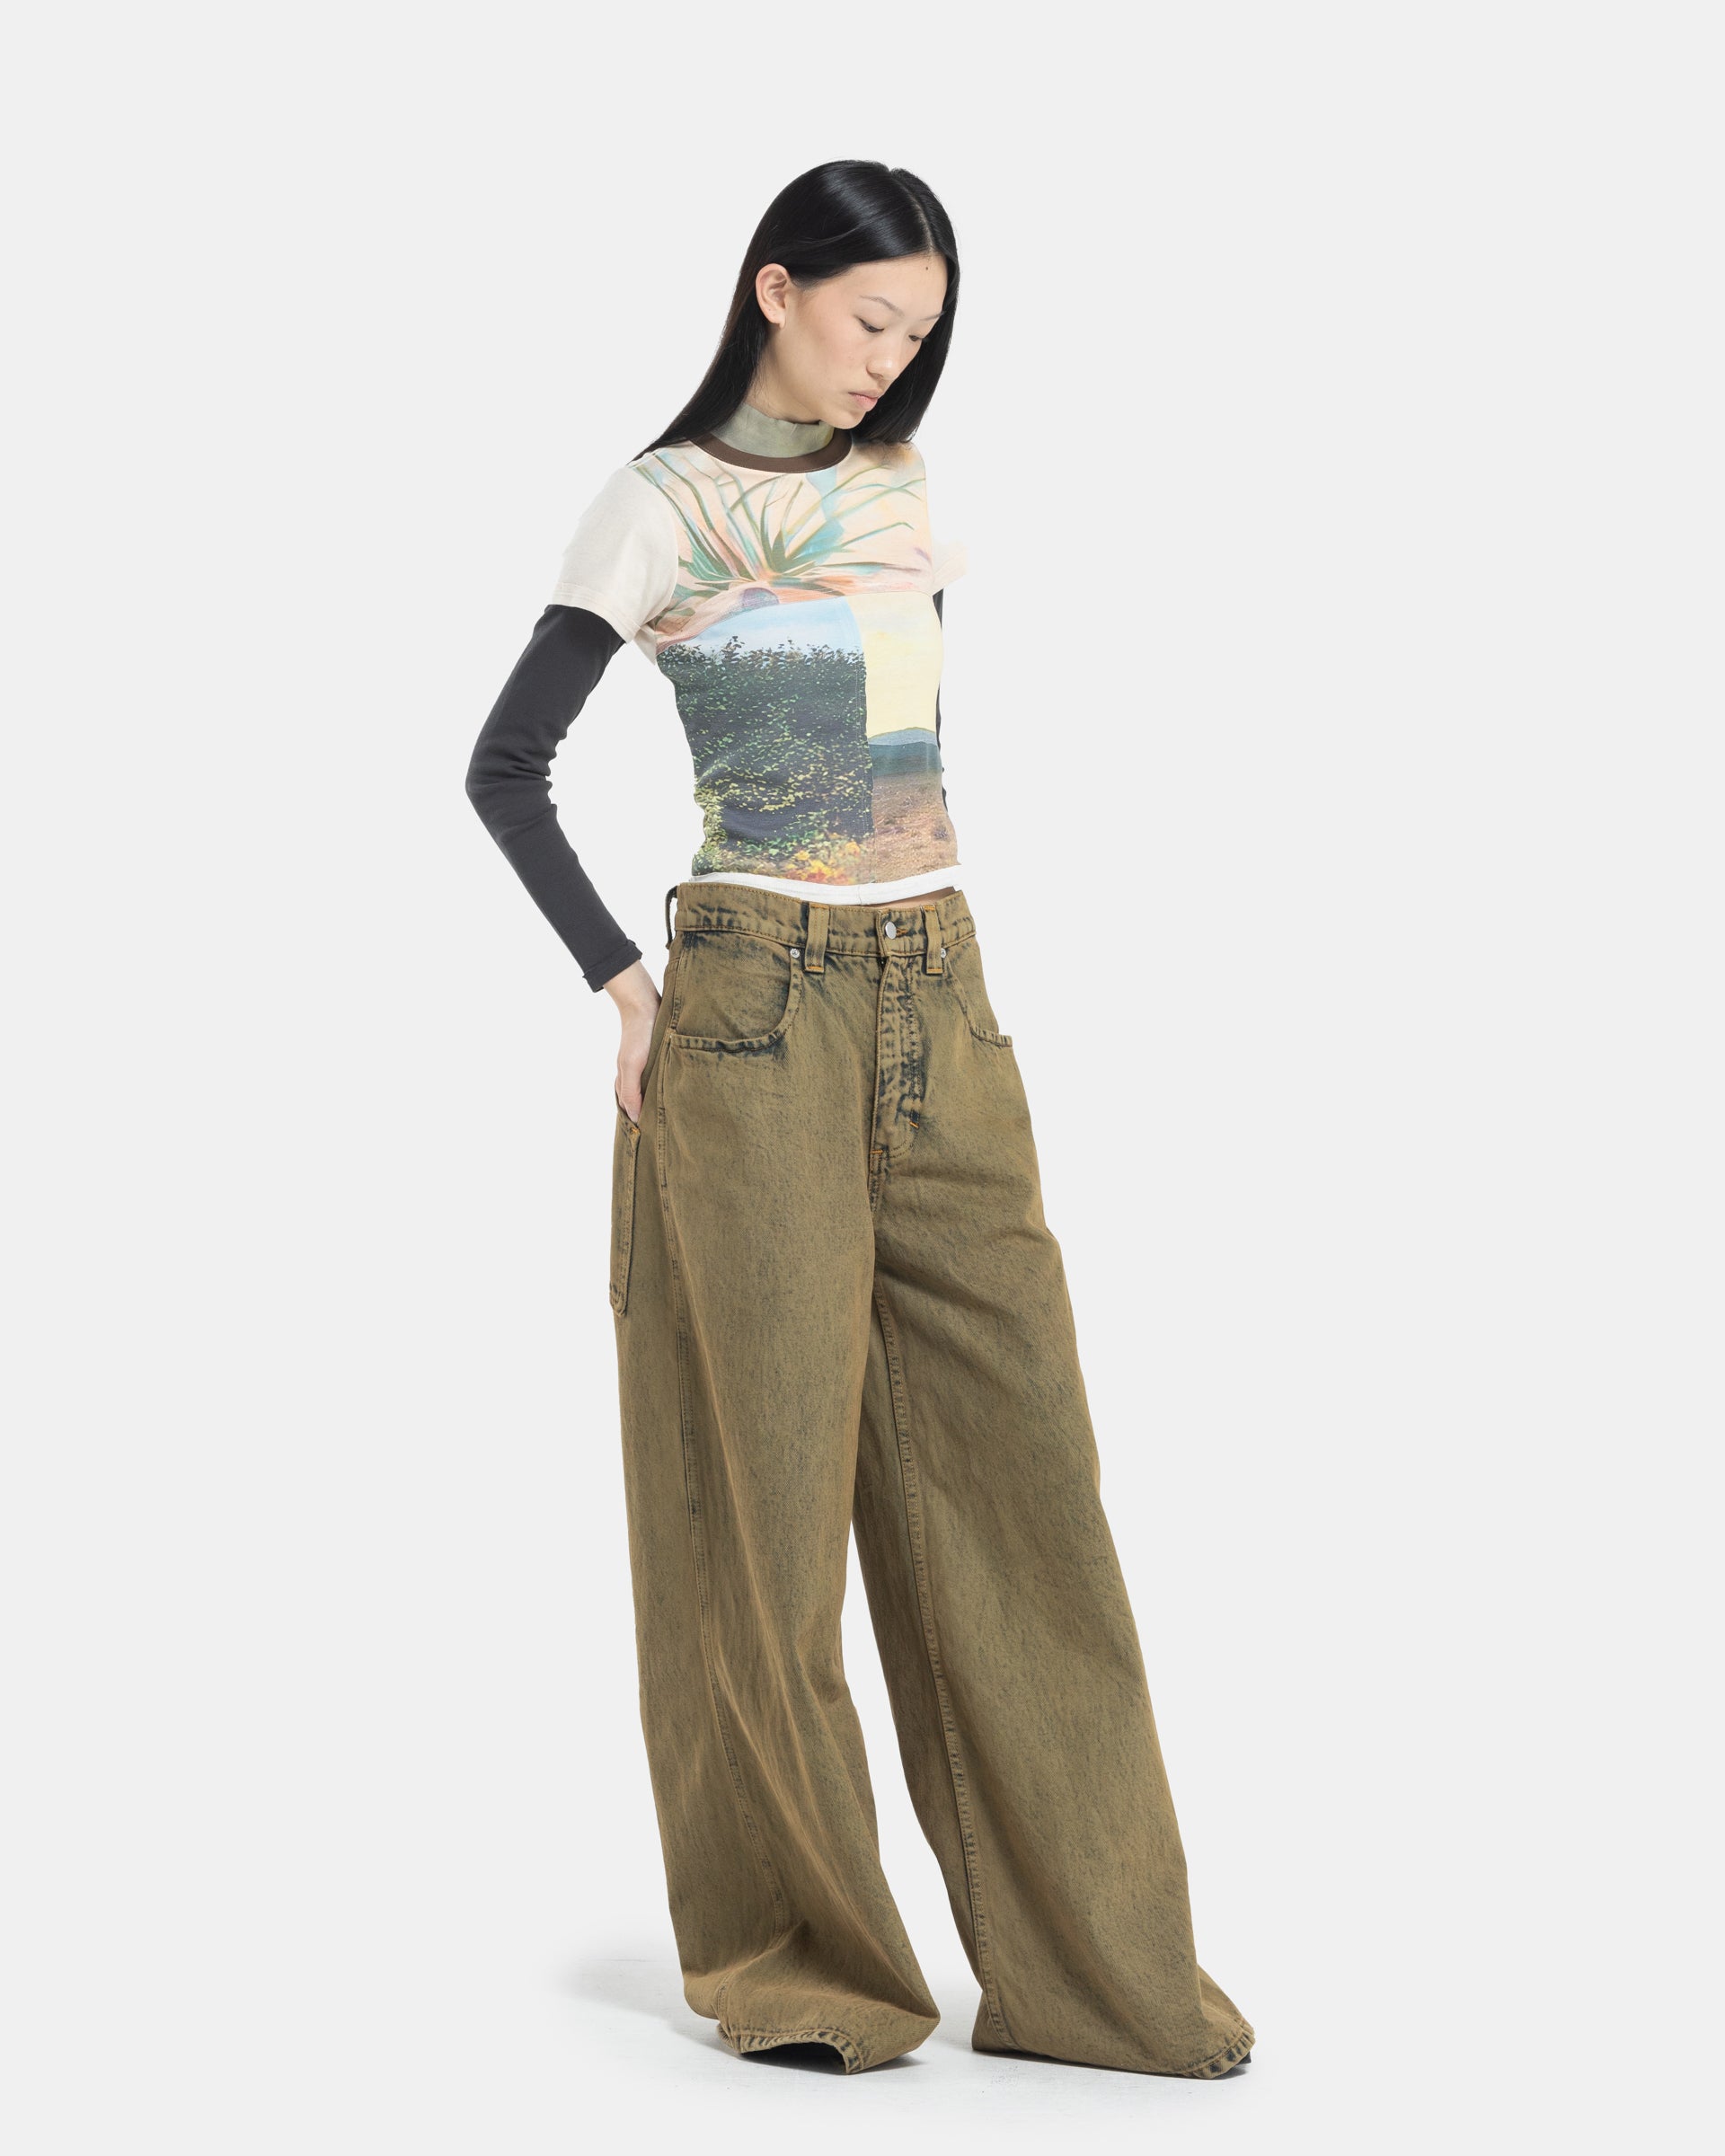 Female model wearing a Eckhaus Latta Lapped Baby Tee with a collage print design and ultra-wide-leg jeans